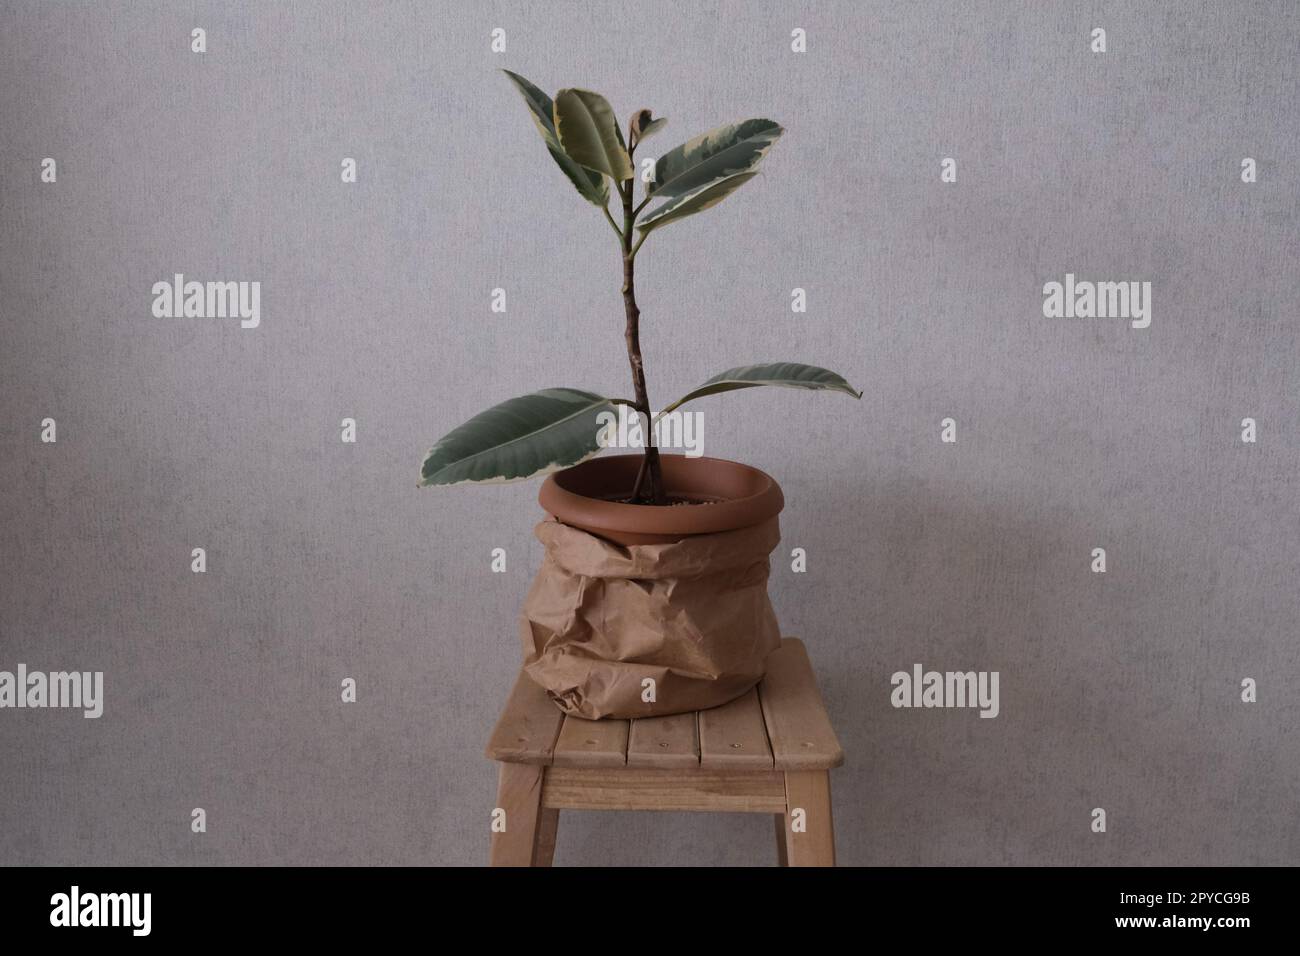 Rubber plant, Ficus Plant in a pot covered with paper bag on a coffee table, Ficus Elastica or Rubber Plant. Stock Photo